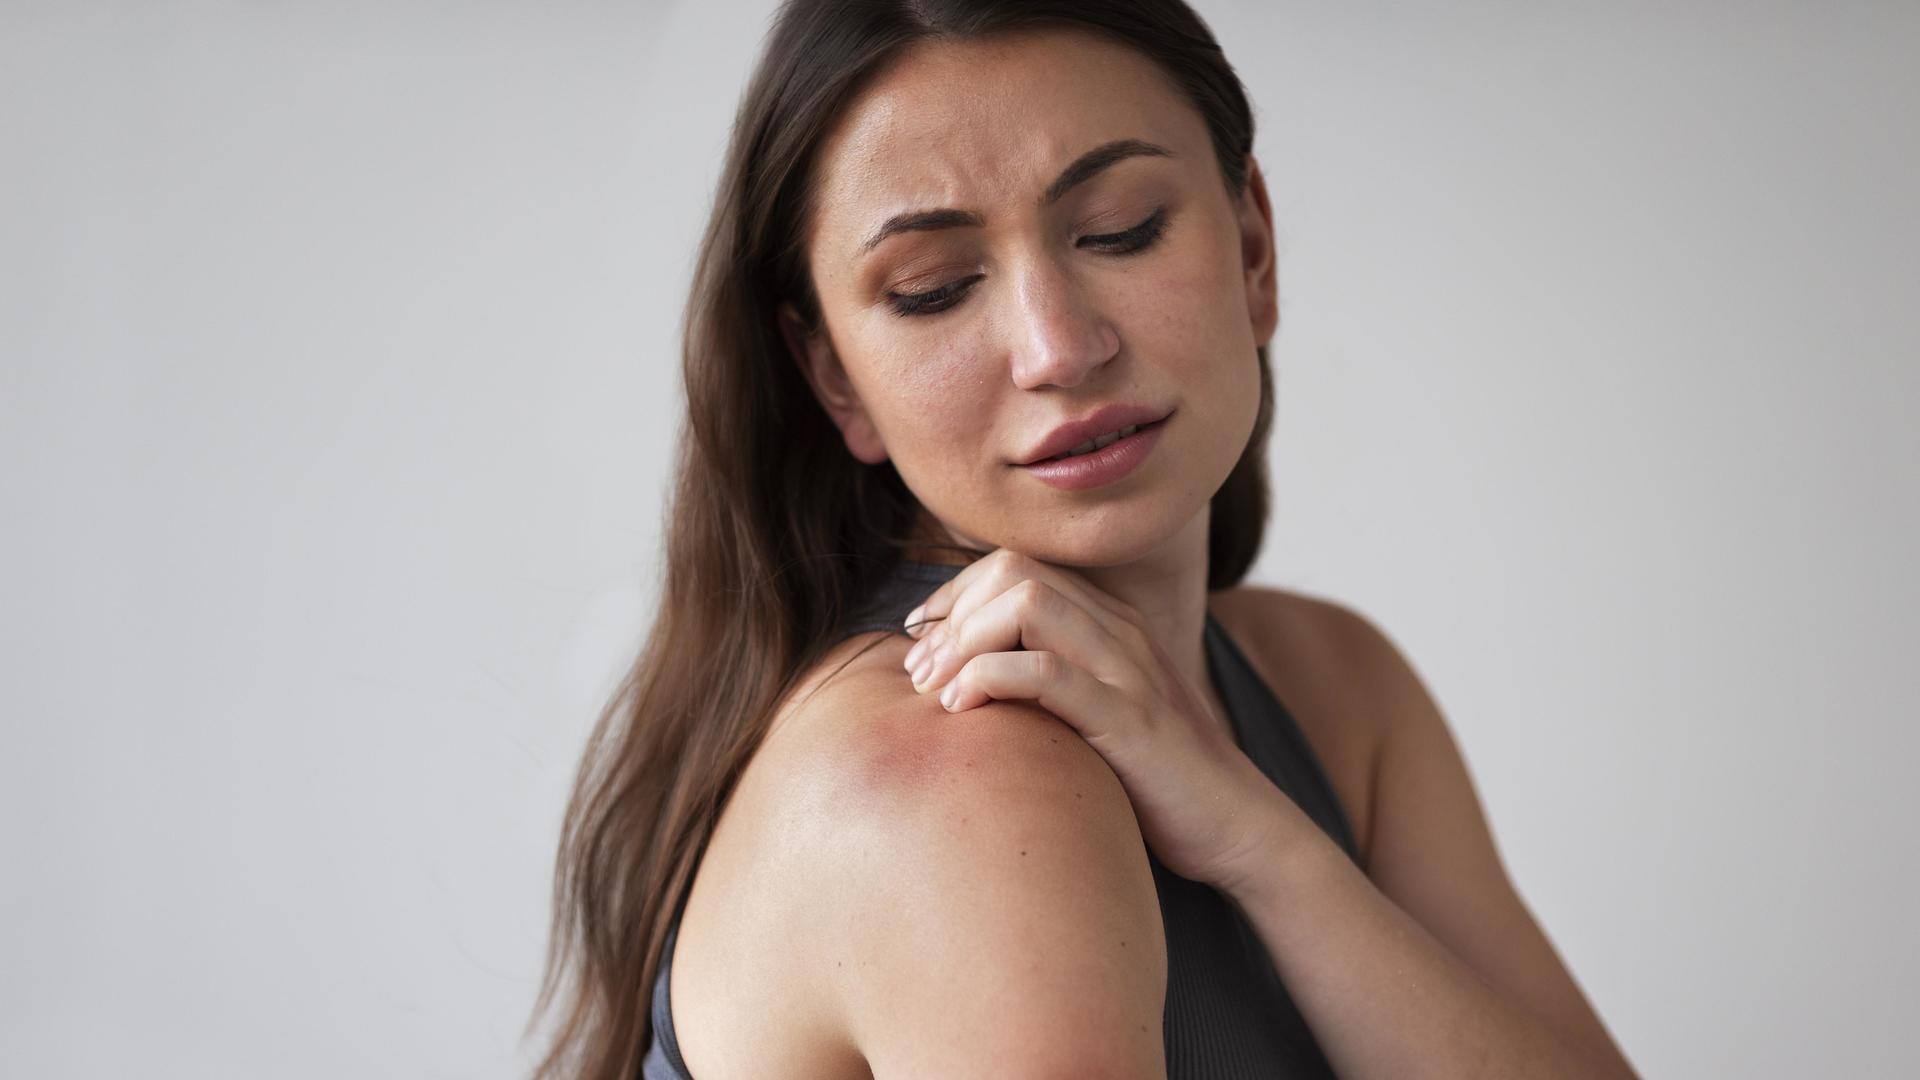 Itchy skin: These home remedies can come to your rescue